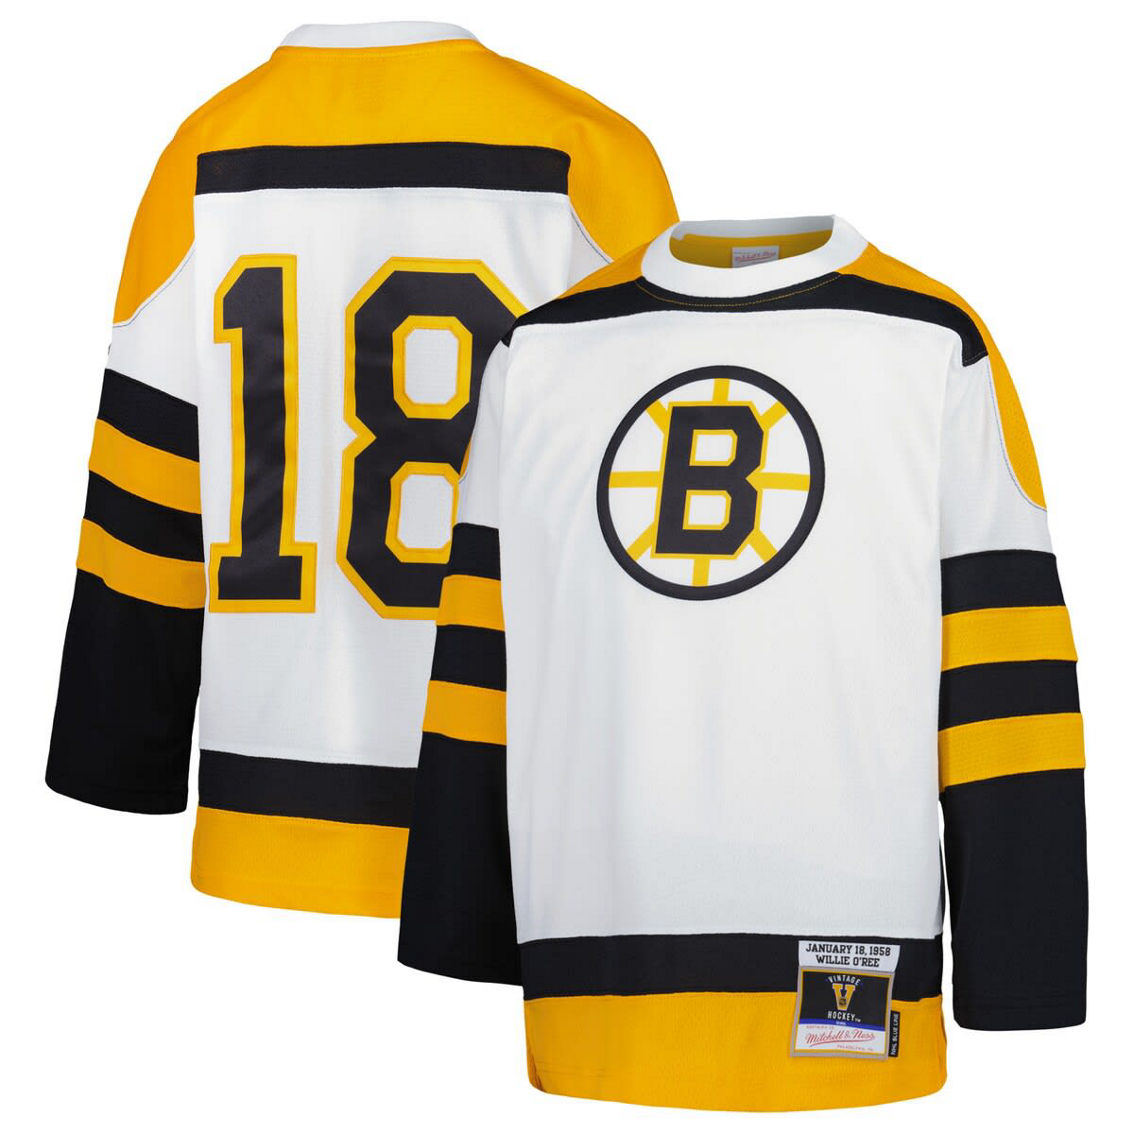 Mitchell & Ness Youth Willie O'Ree White Boston Bruins 1958 Blue Line Player Jersey - Image 2 of 4